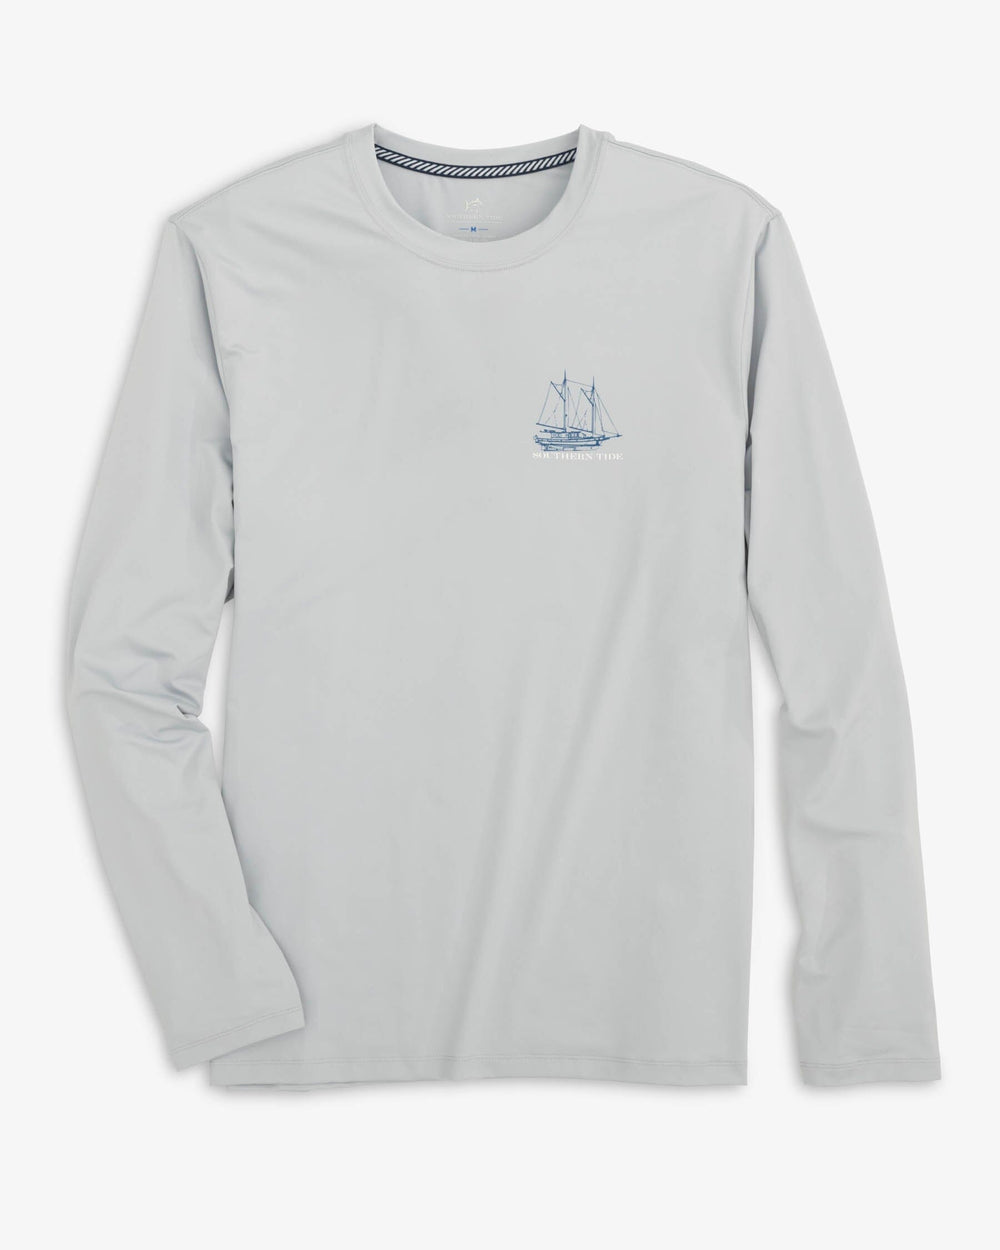 The front view of the Southern Tide Sail Boat Schematic Design Long Sleeve Performance T-Shirt by Southern Tide - Slate Grey